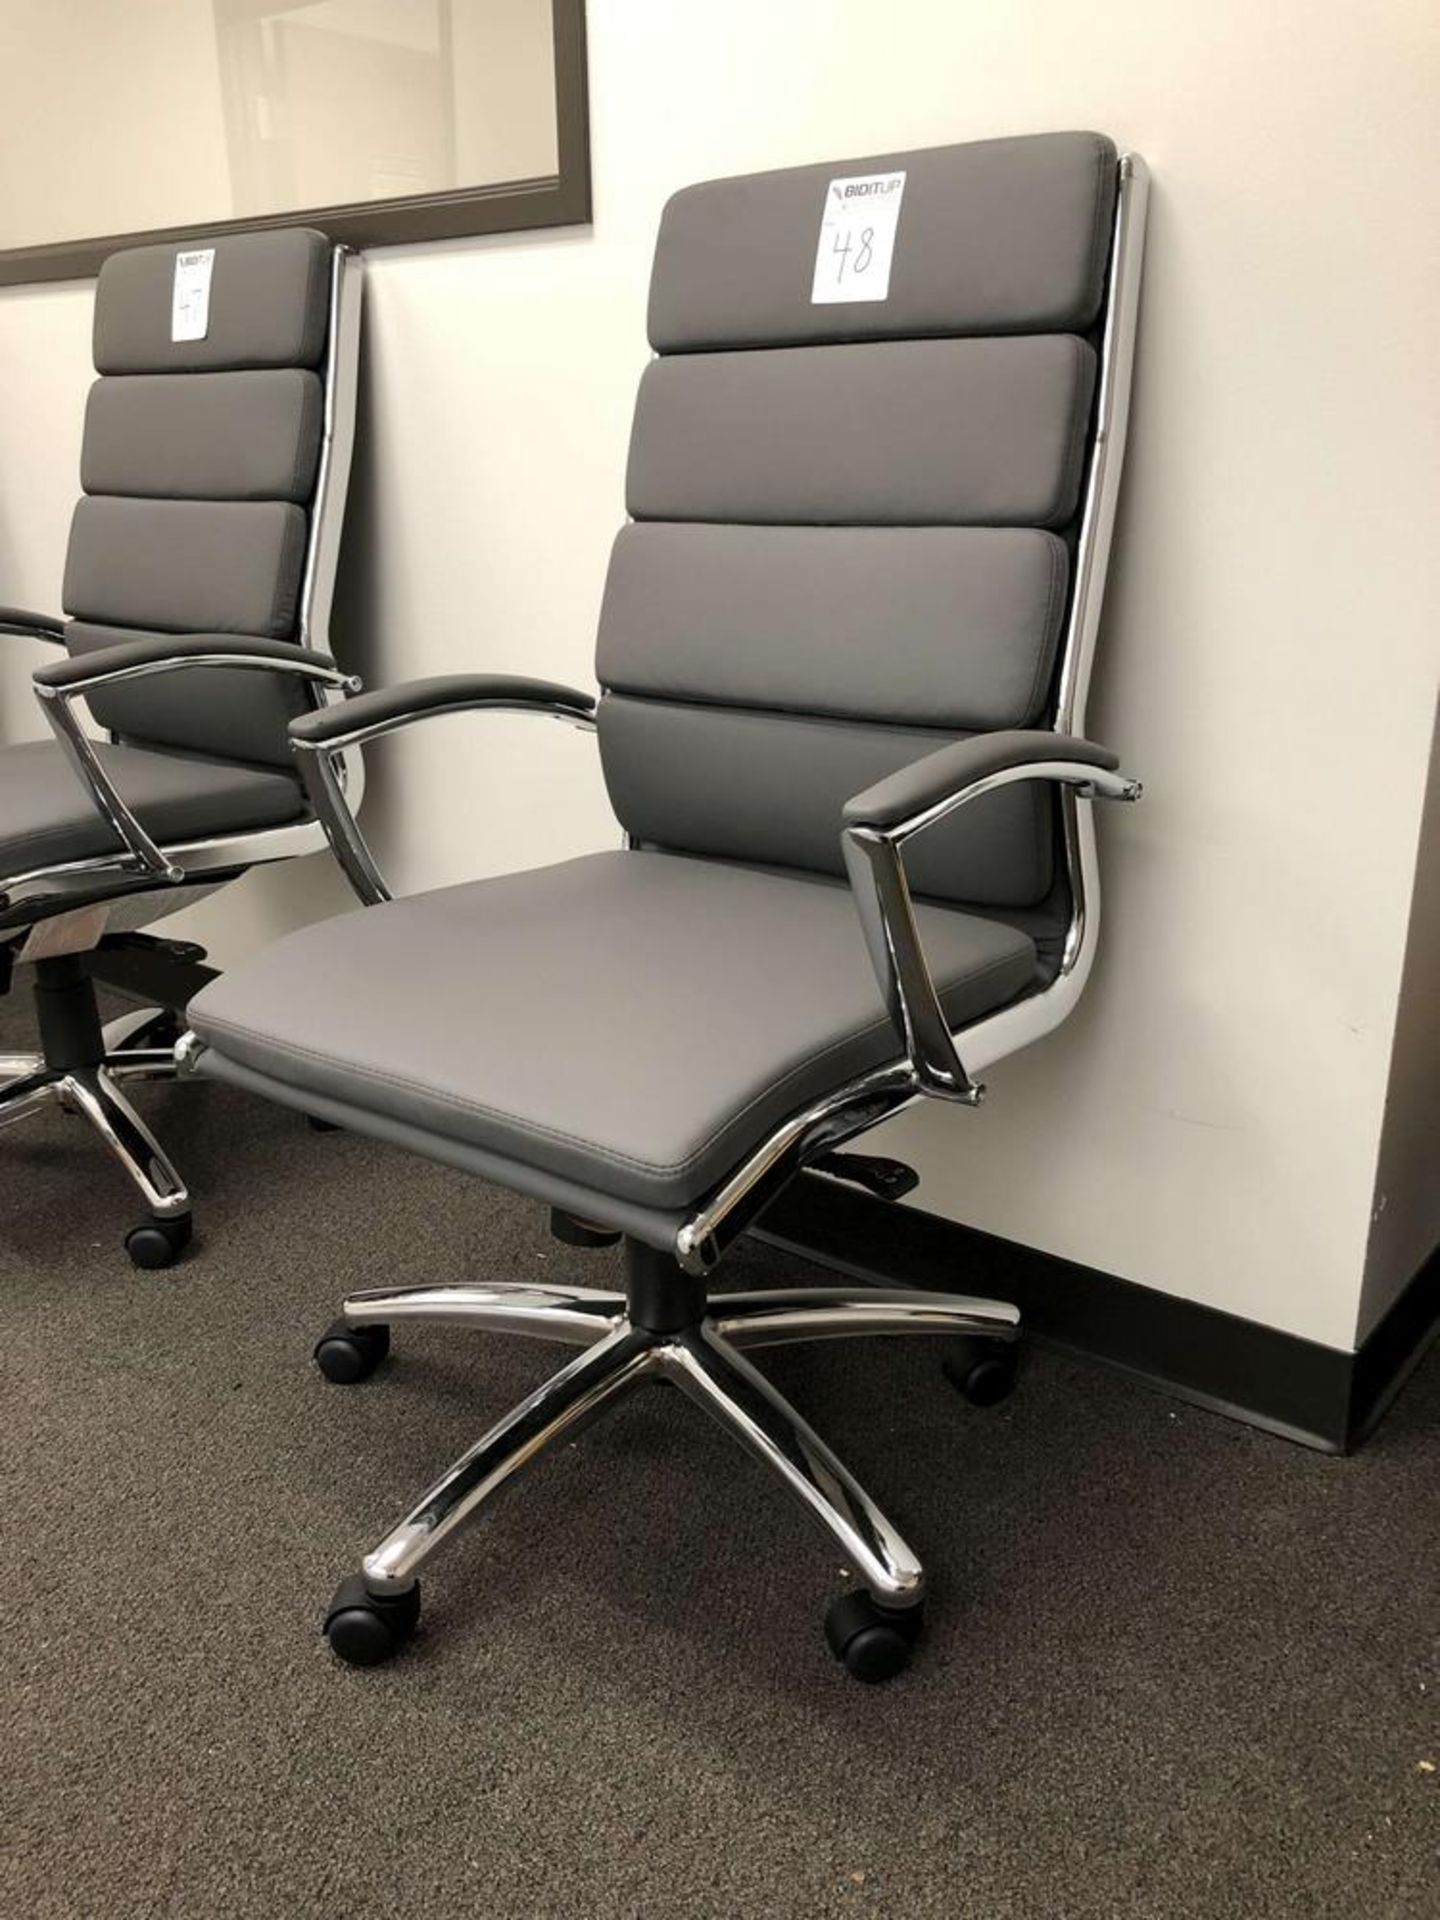 Boss CaressoftPlus High-Back Executive Office Chairs [Grey]